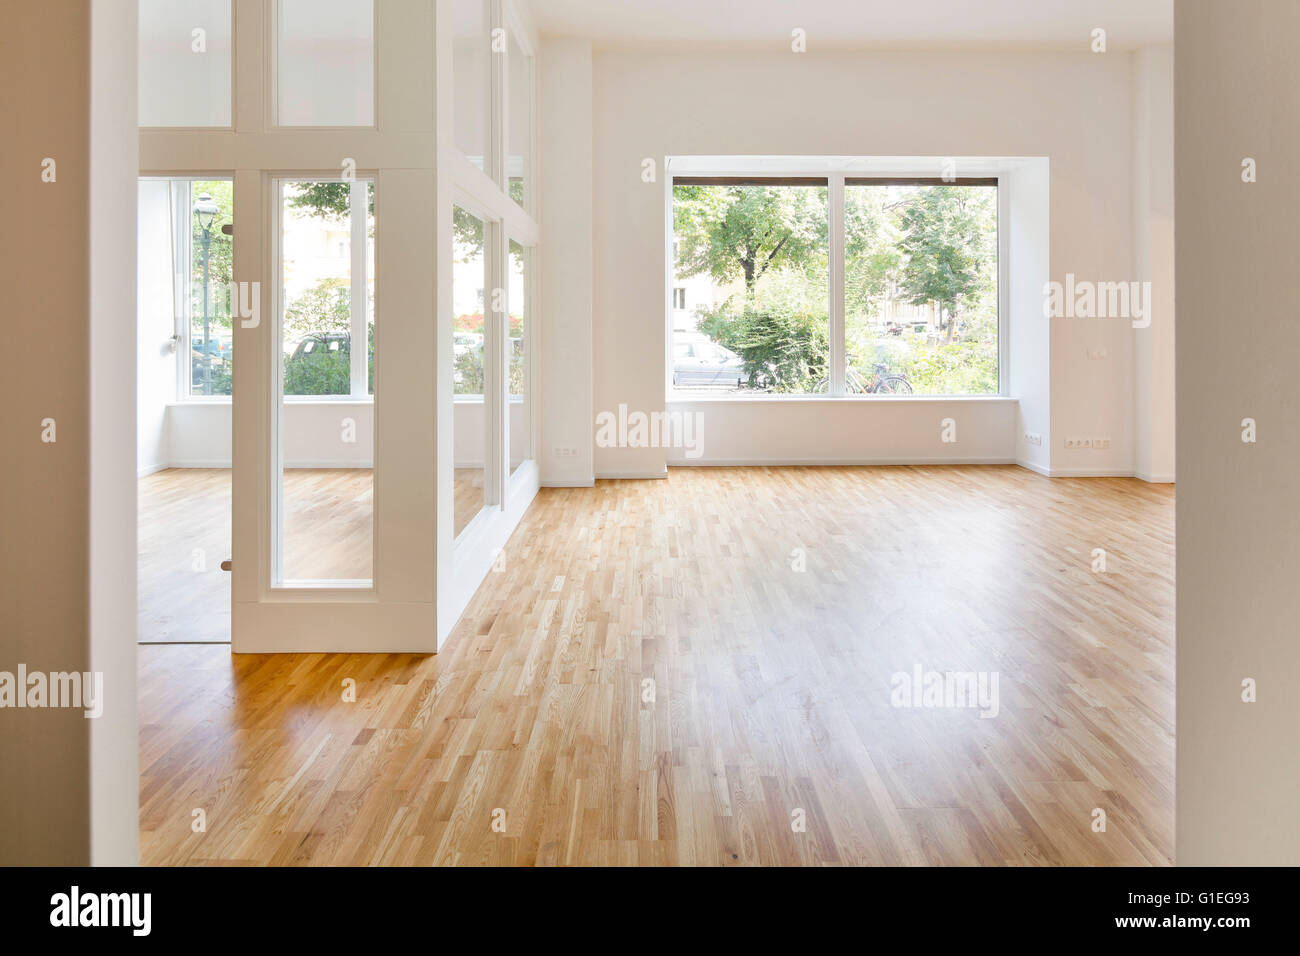 Buro, 53 Reichenberger Strasse. Spacious floor space with contemporary layout and large windows. Stock Photo